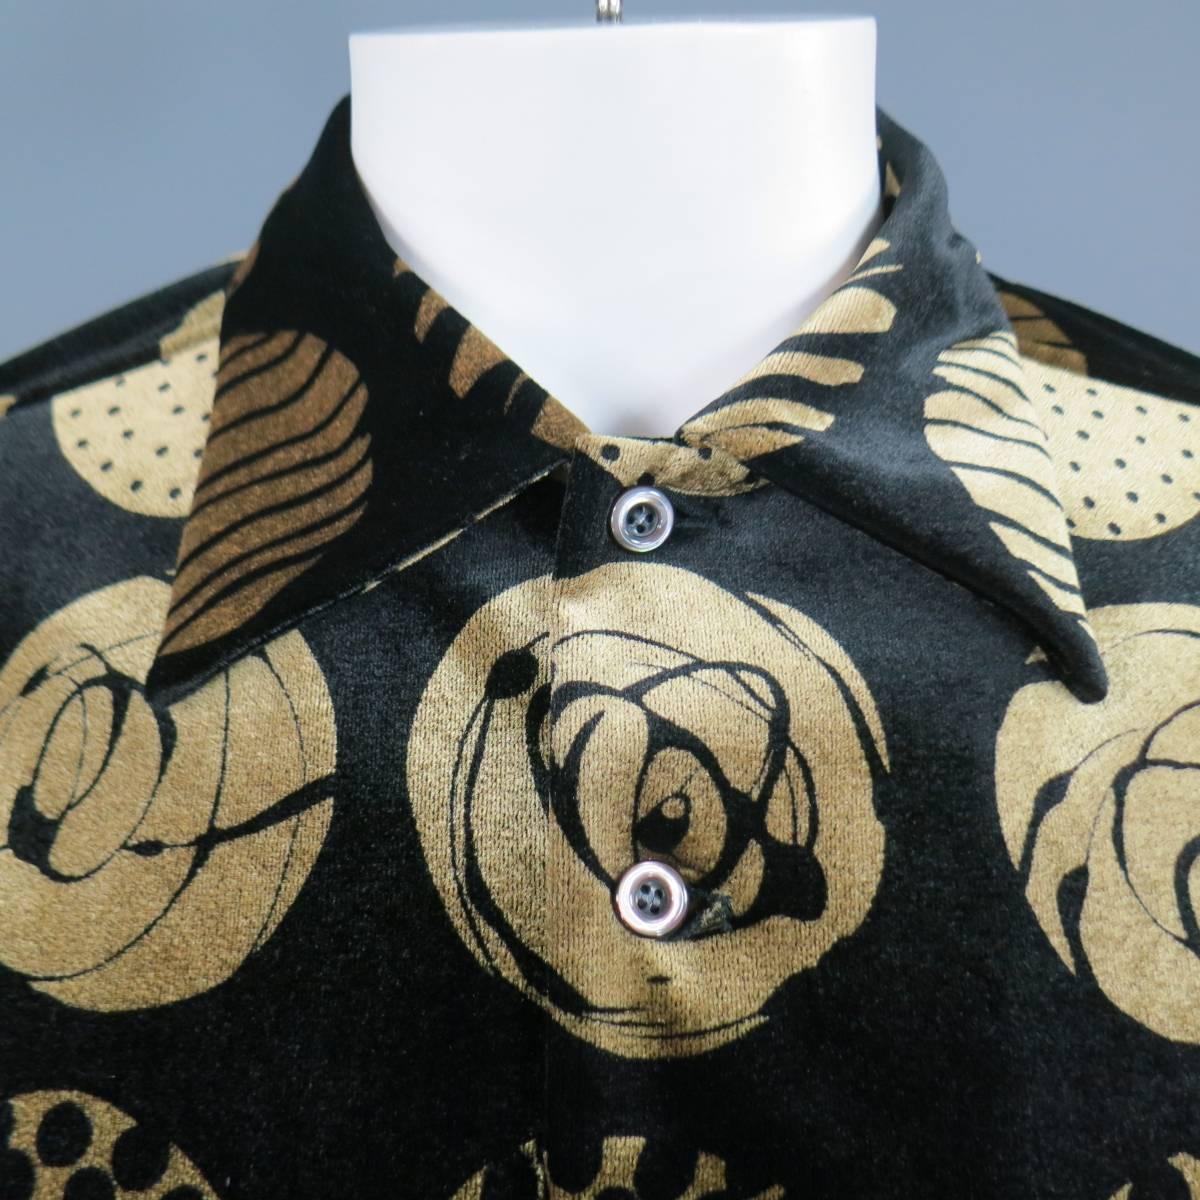 This rare vintage MATSUDA shirt comes in a black and metallic gold large scale printed polka dot velvet and features a pointed collar, patch breast pocket, and pearlescent buttons. Made in Japan.

Excellent Pre-Owned Condition.
Marked: